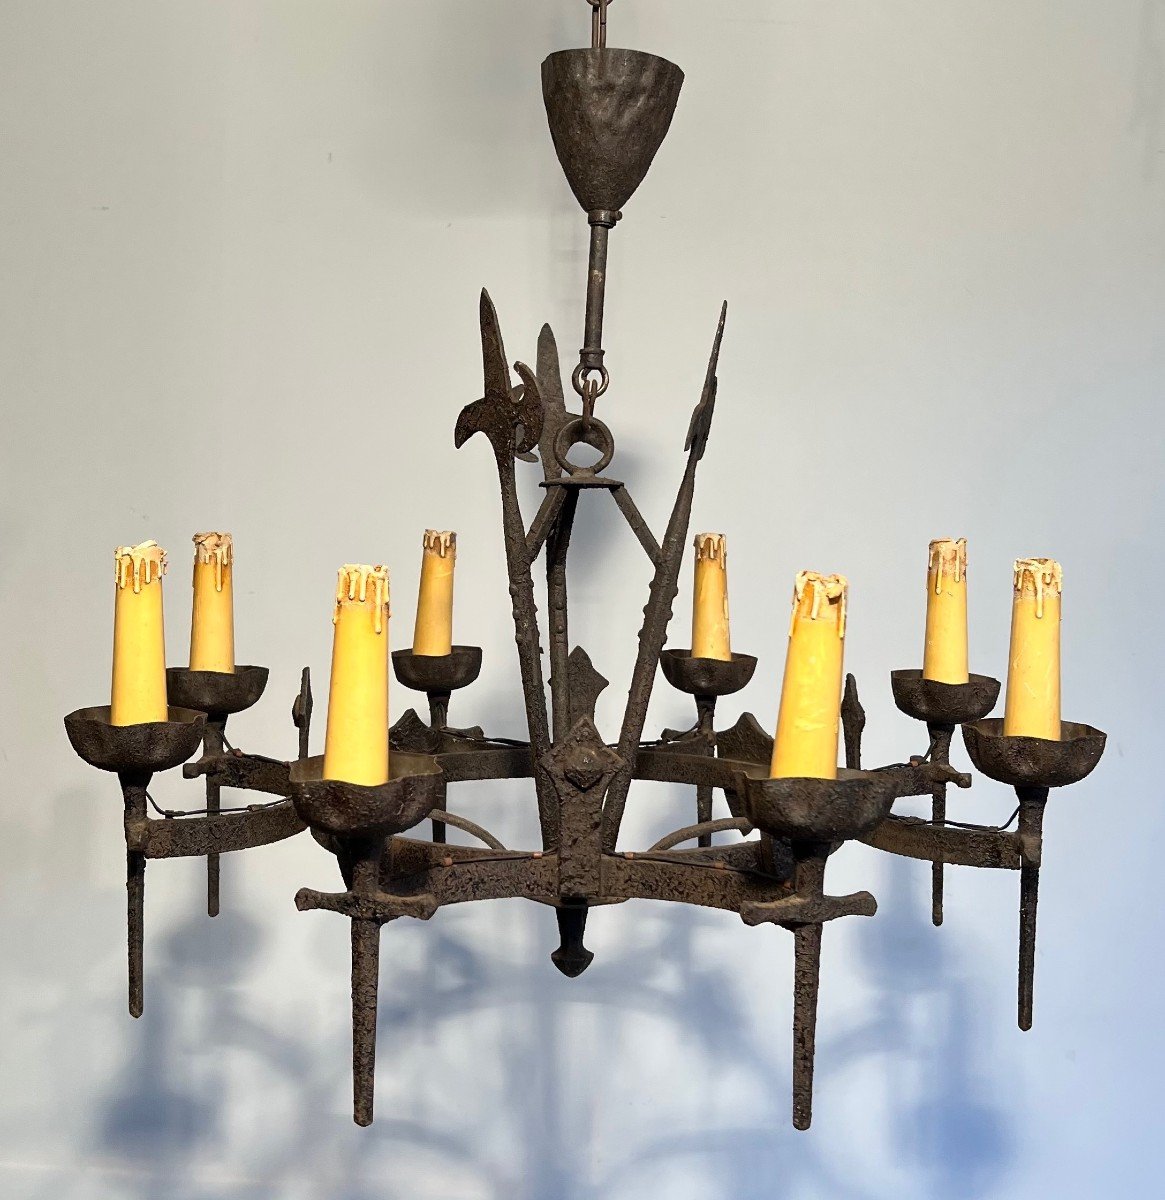 Gothic Style Wrought Iron Chandelier With 8 Arms Of Light. This Chandelier Is Part Of A Rare Set-photo-7